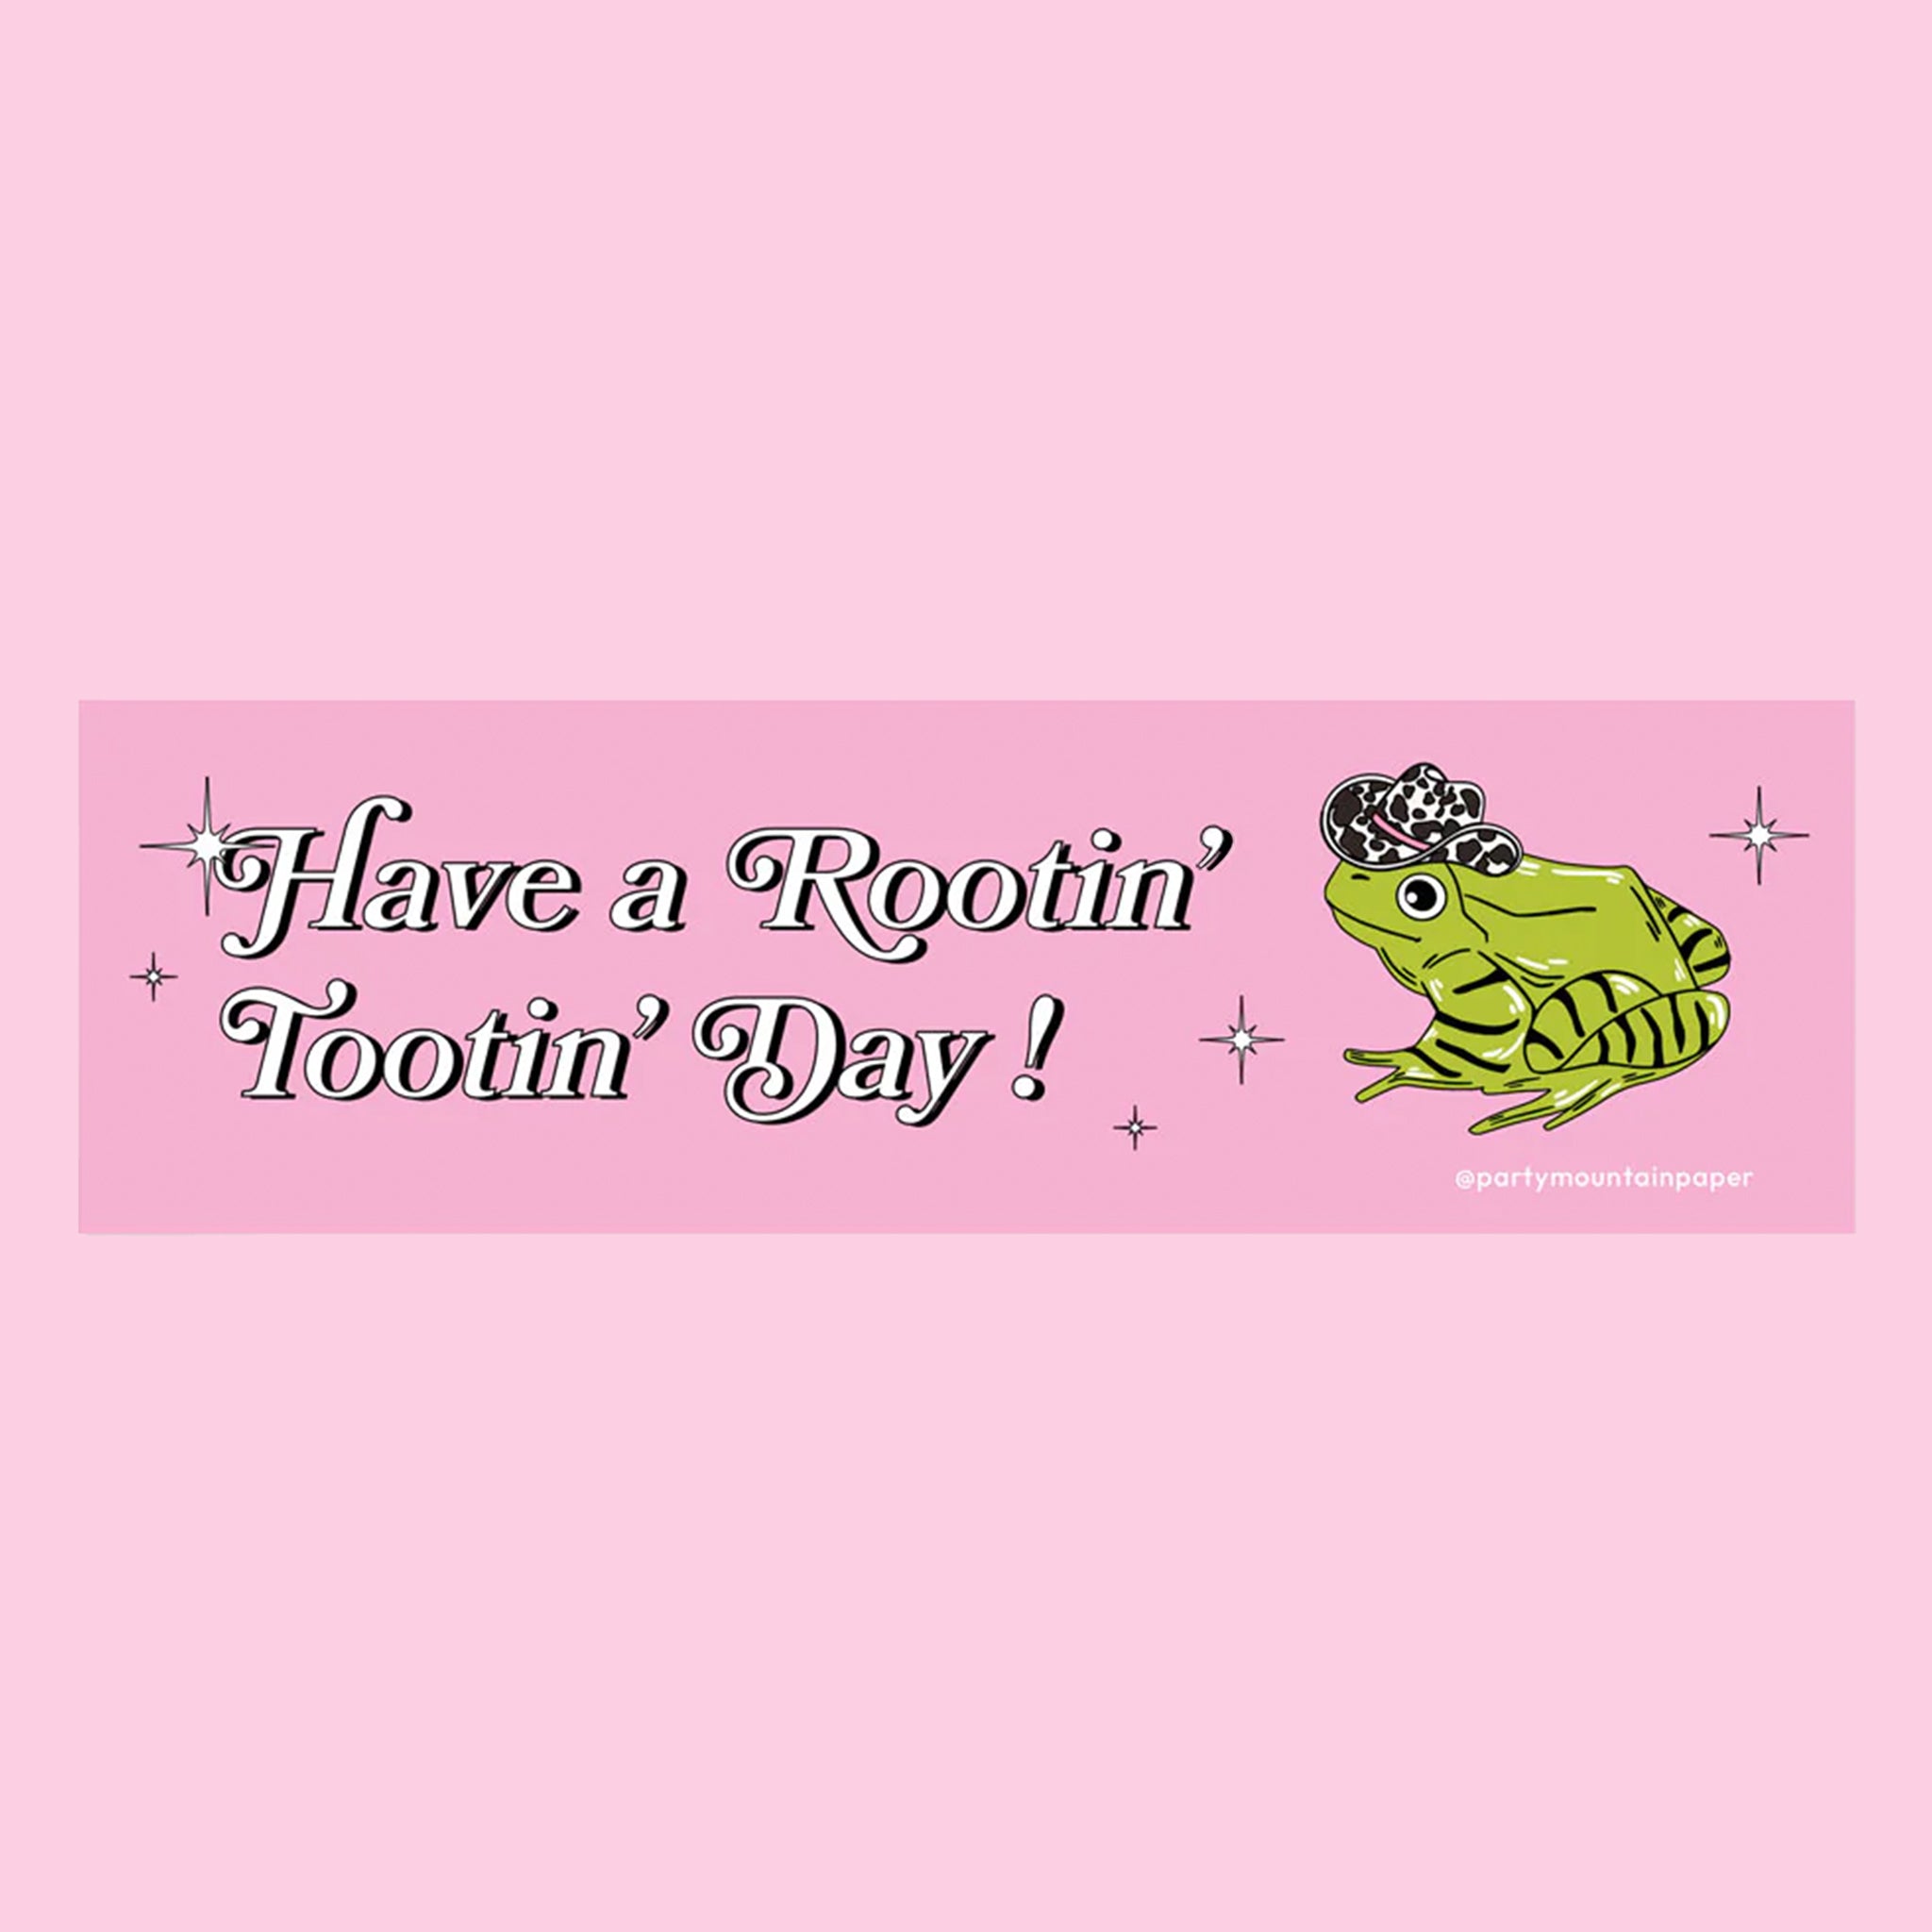 On a pink background is a pink bumper sticker with an illustration of a green frog with a cow print cowboy hat on and text that reads, "Have a Rootin' Tootin' Day!". 